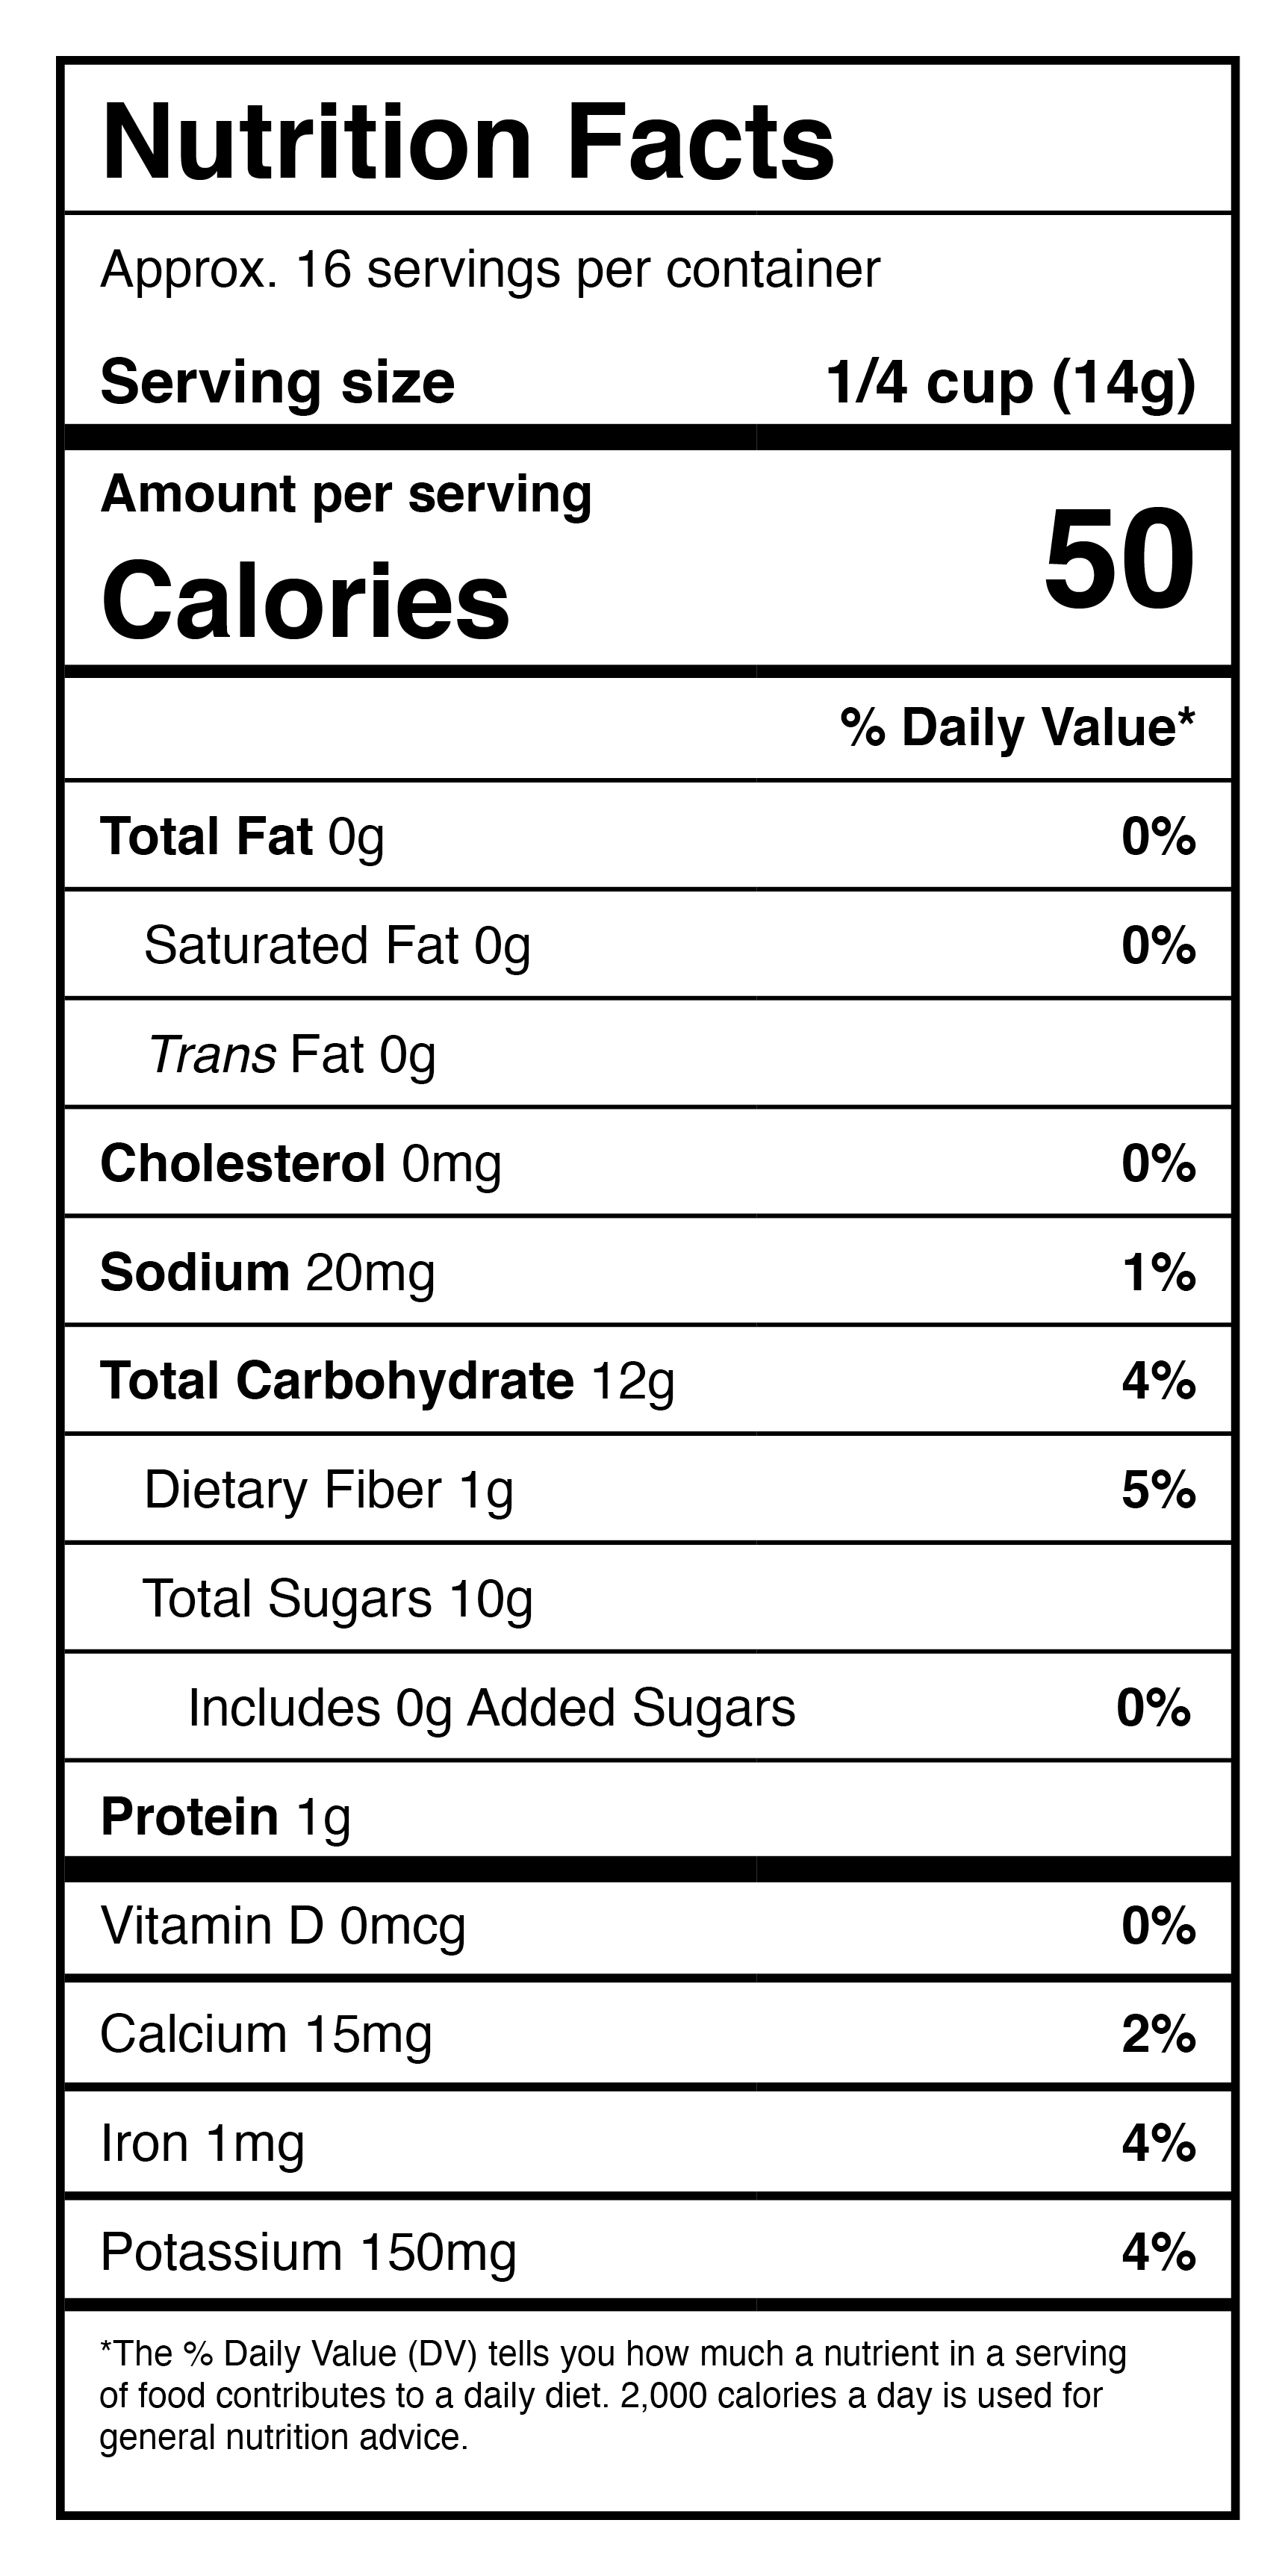 A protein powder with a nutrition label.